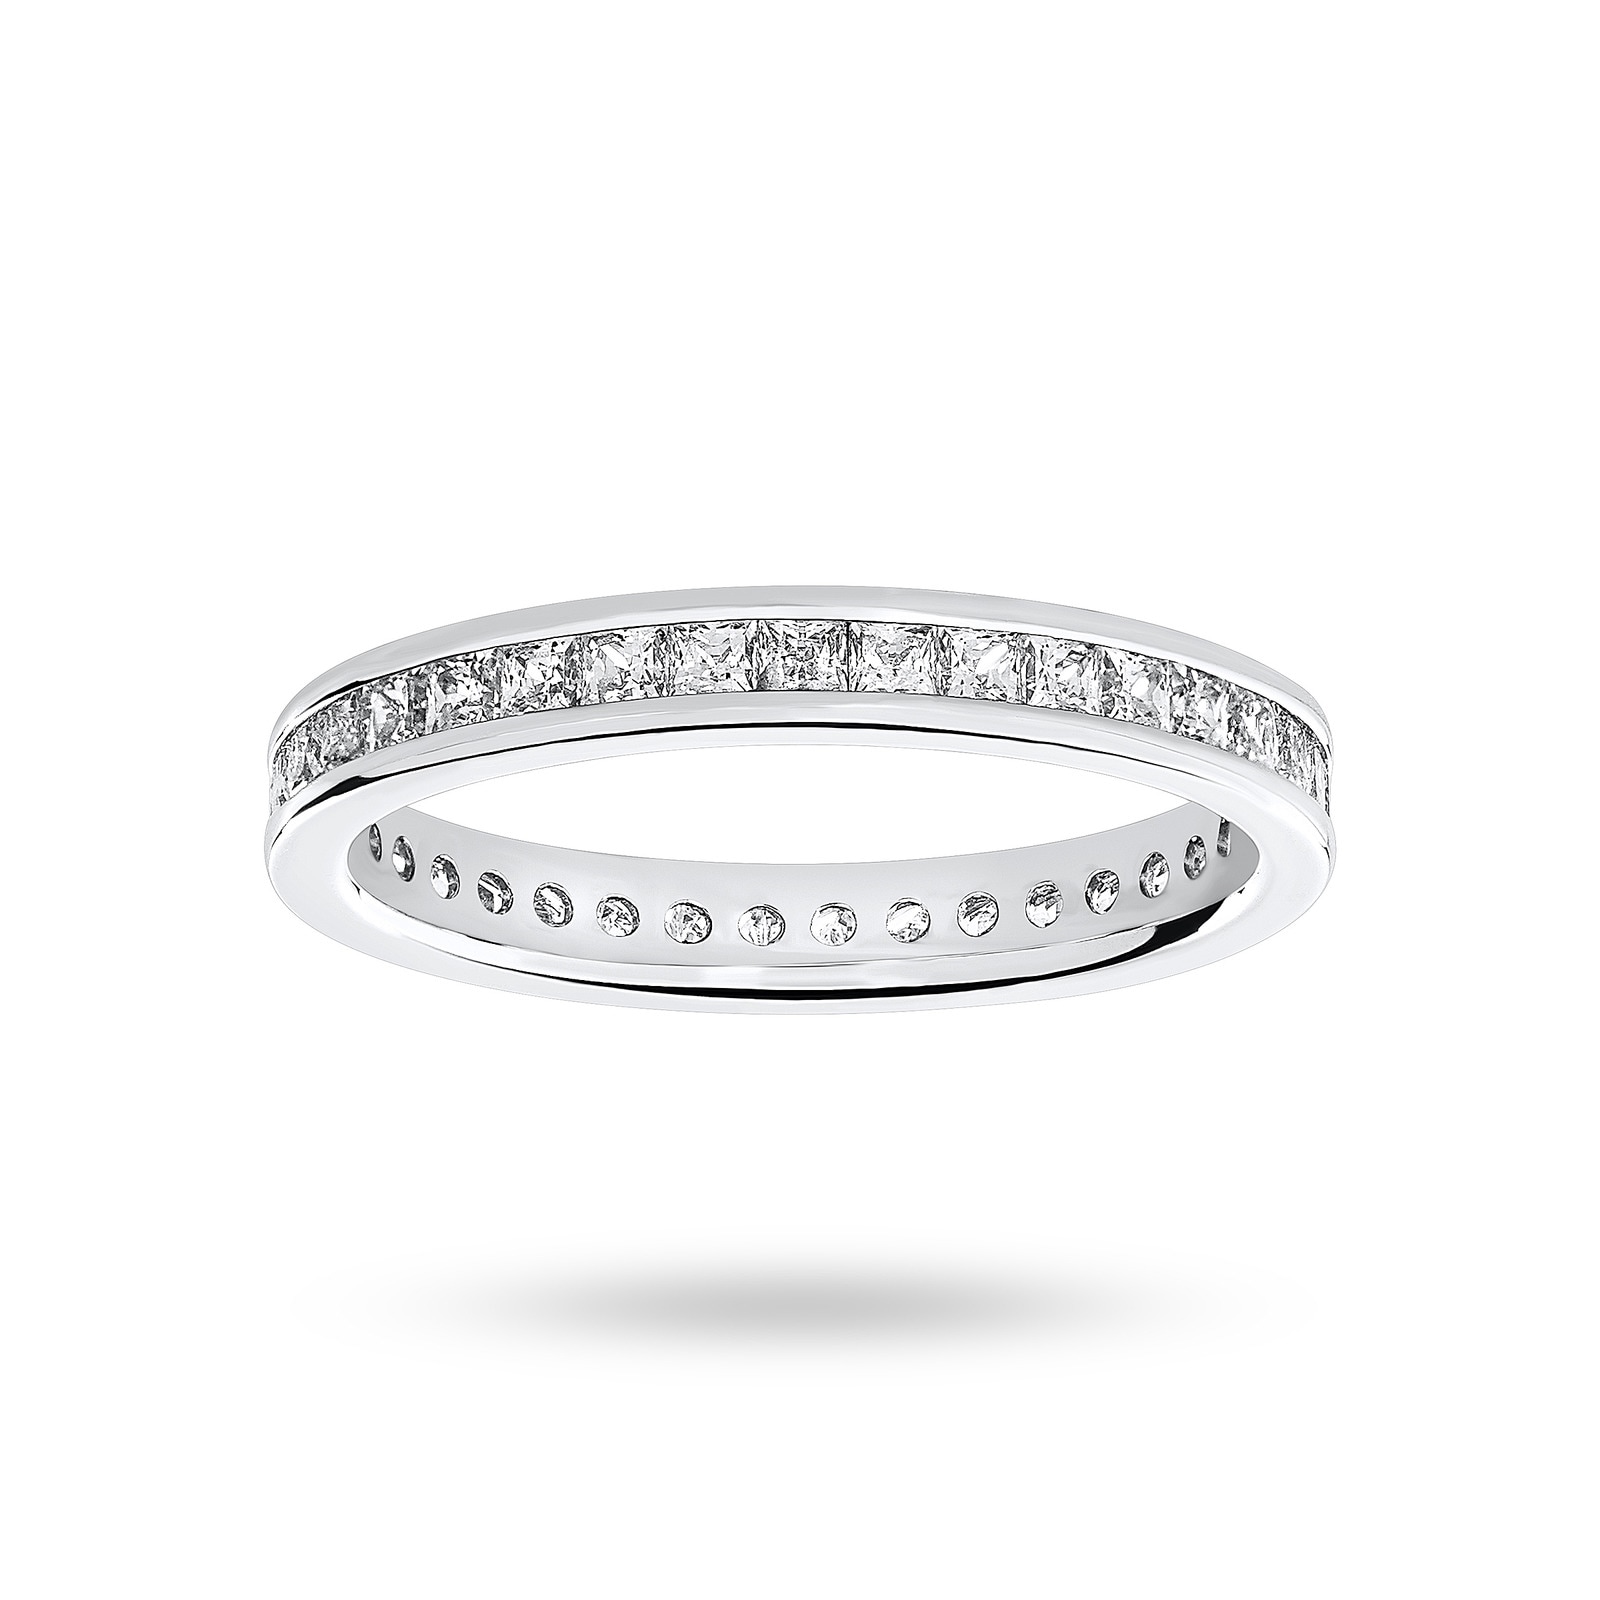 18 Carat White Gold 1.00 Carat Princess Cut Channel Set Full Eternity Ring - Ring Size O